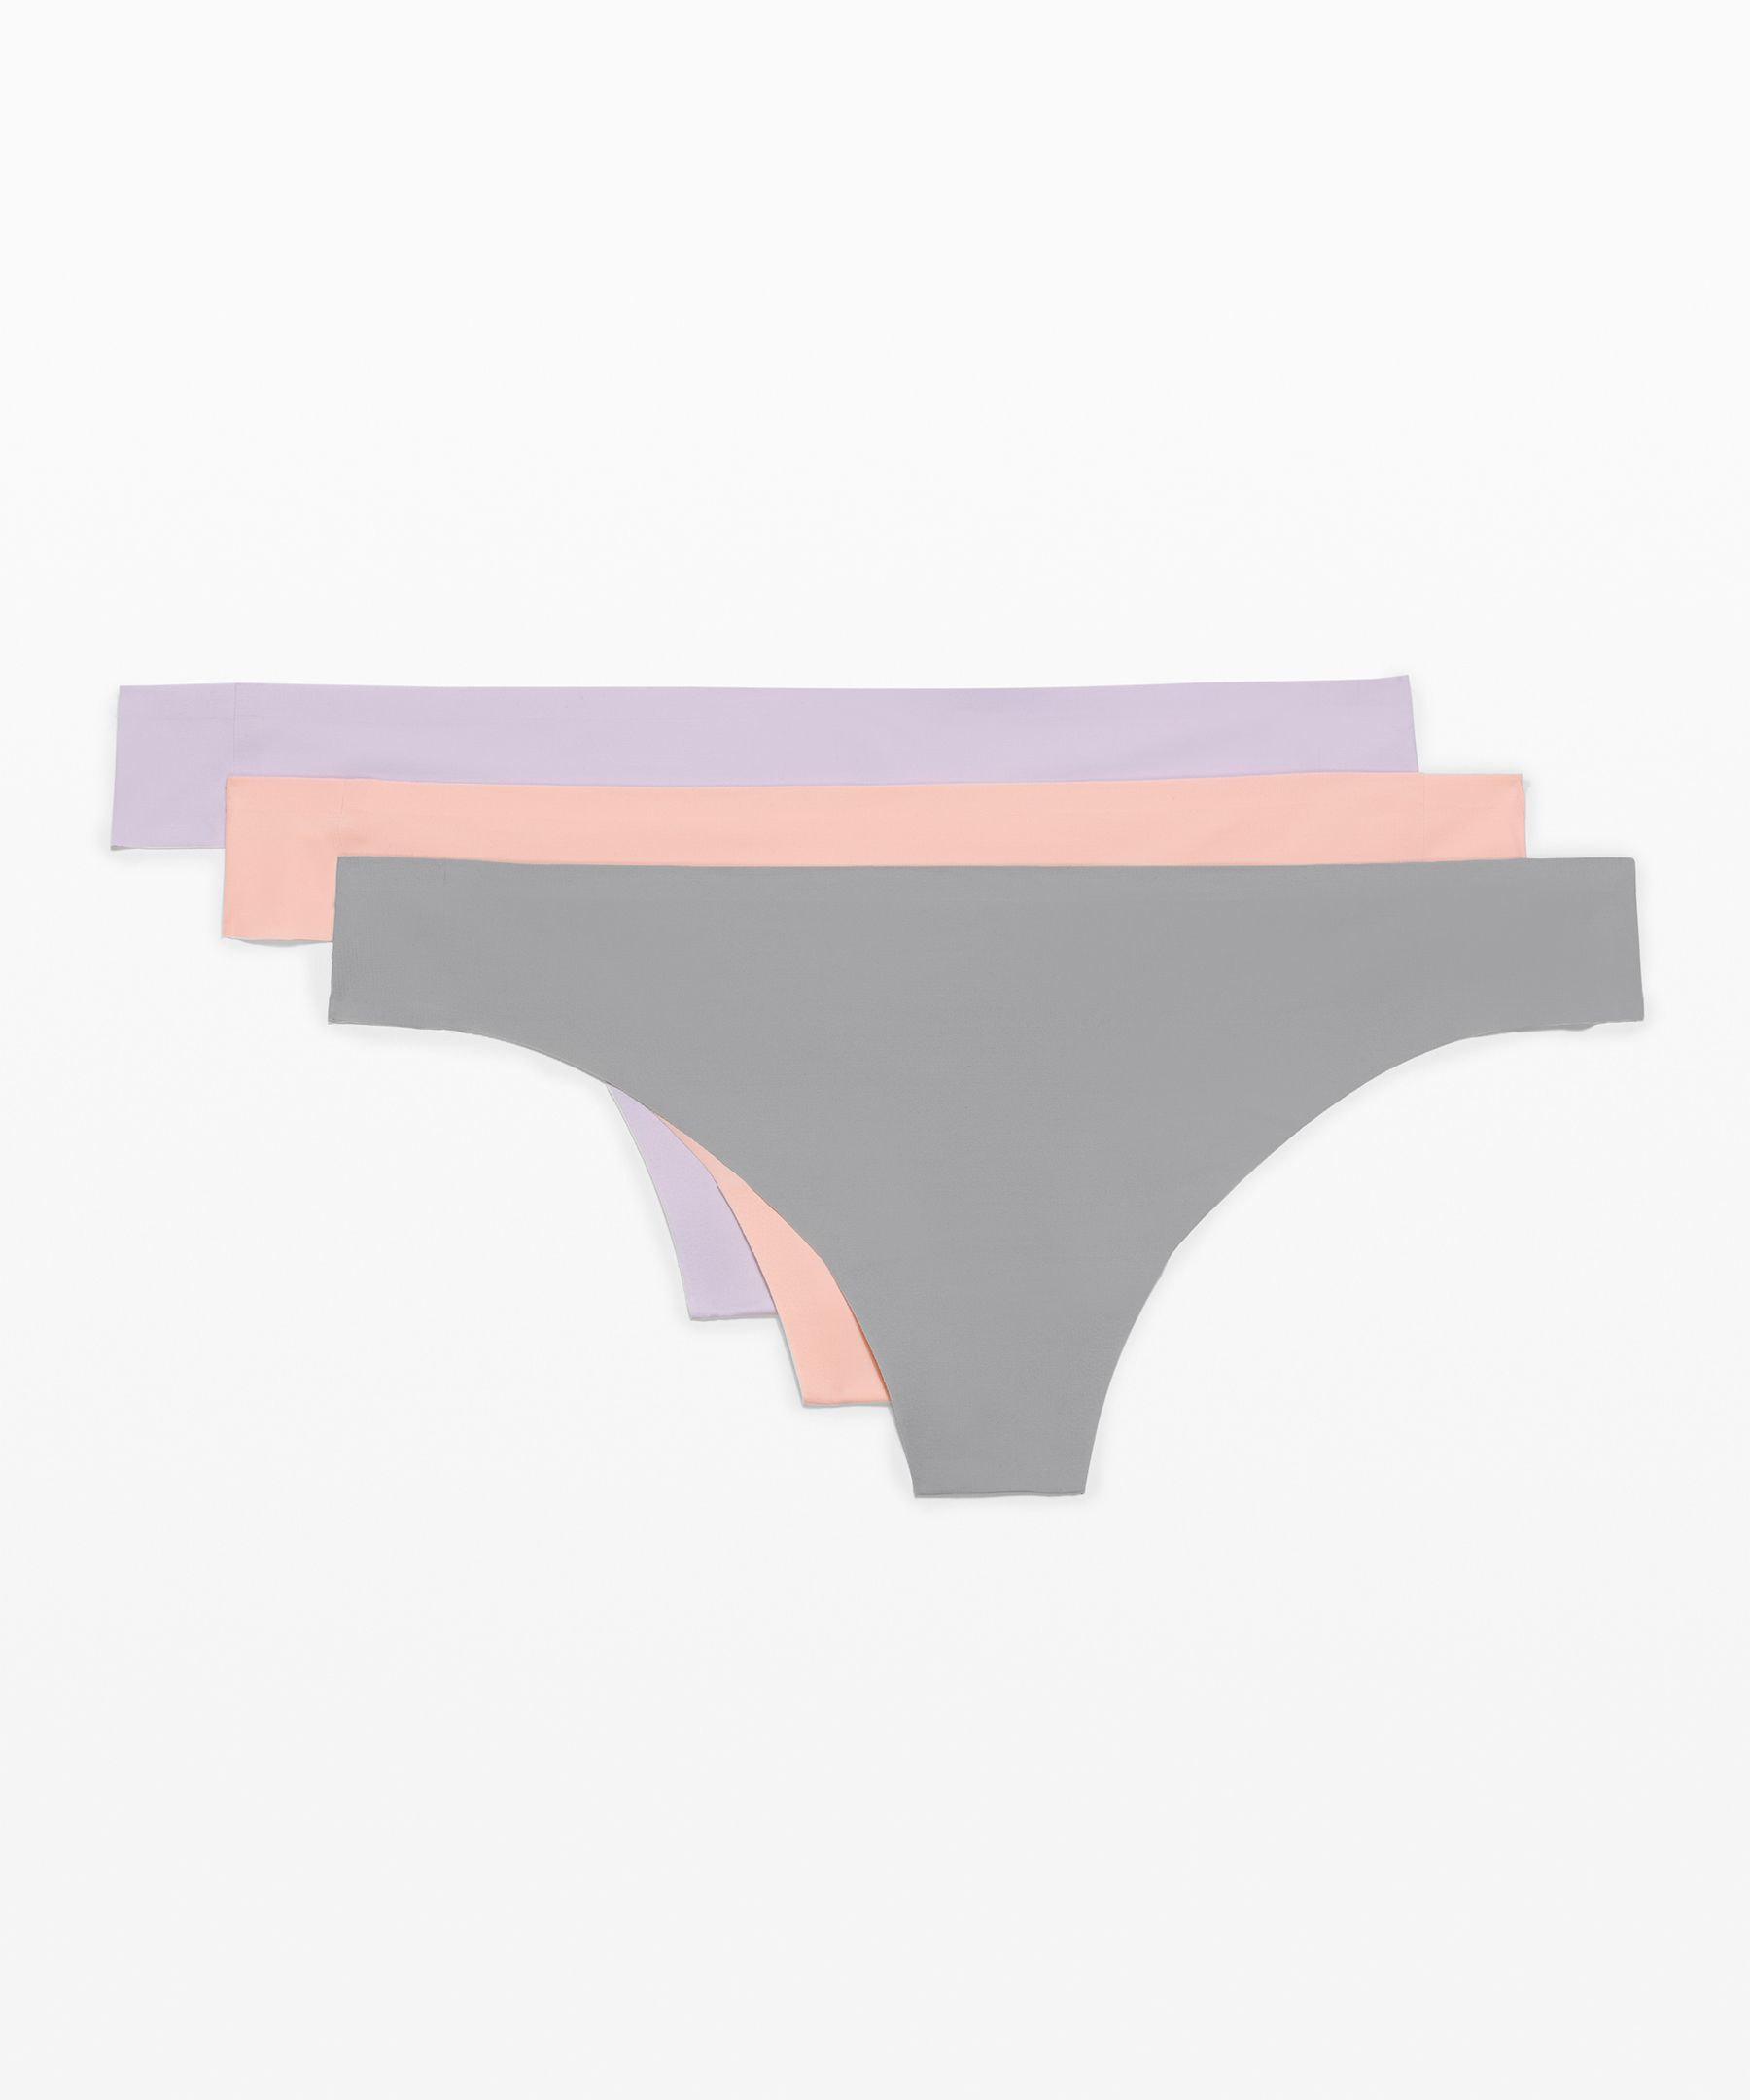  Victoria's Secret Cotton Thong Panty Pack, Smooth